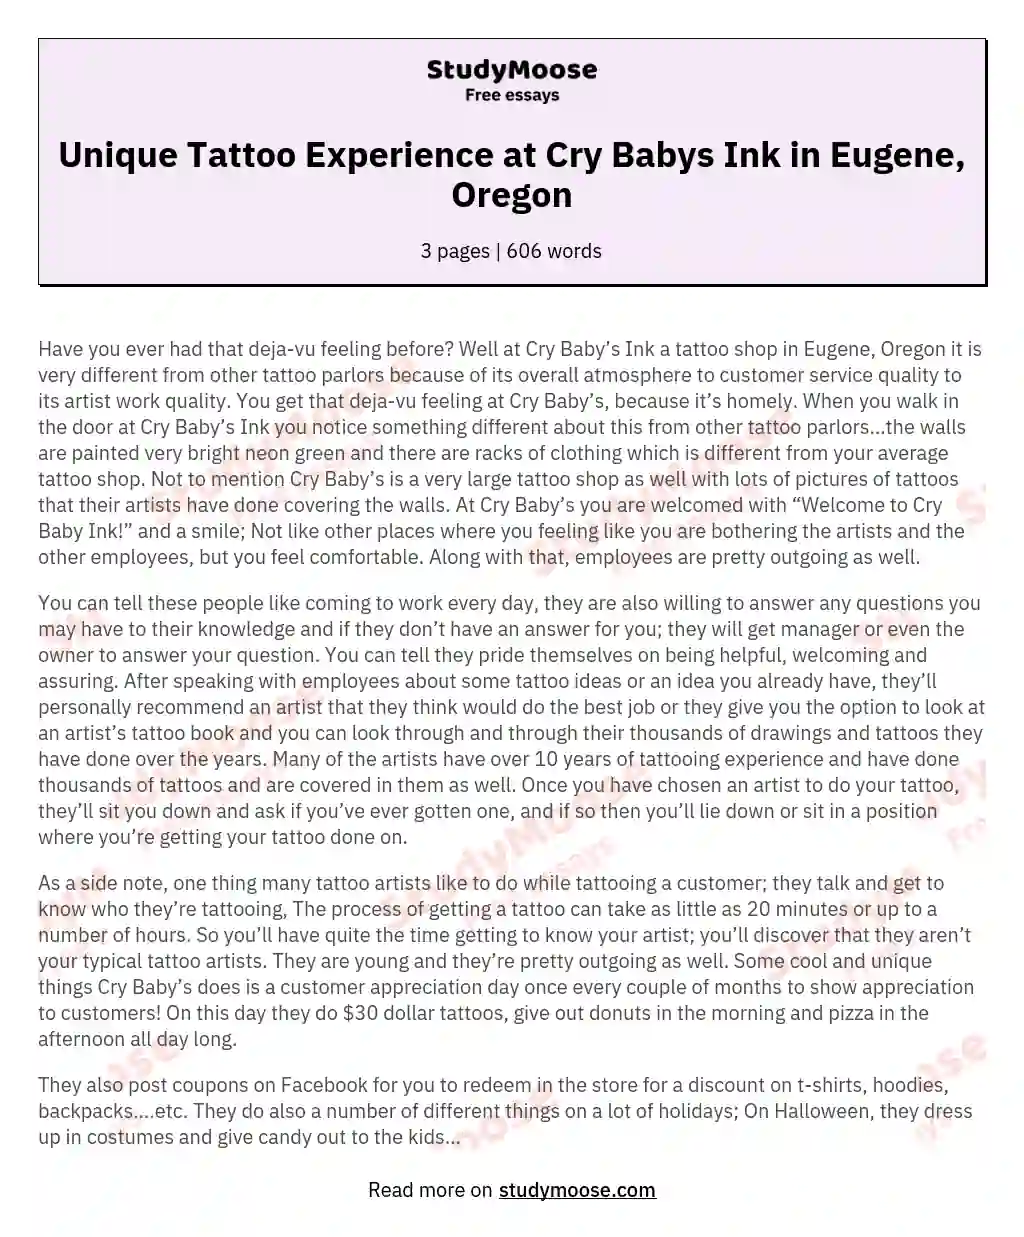 Unique Tattoo Experience at Cry Babys Ink in Eugene, Oregon essay